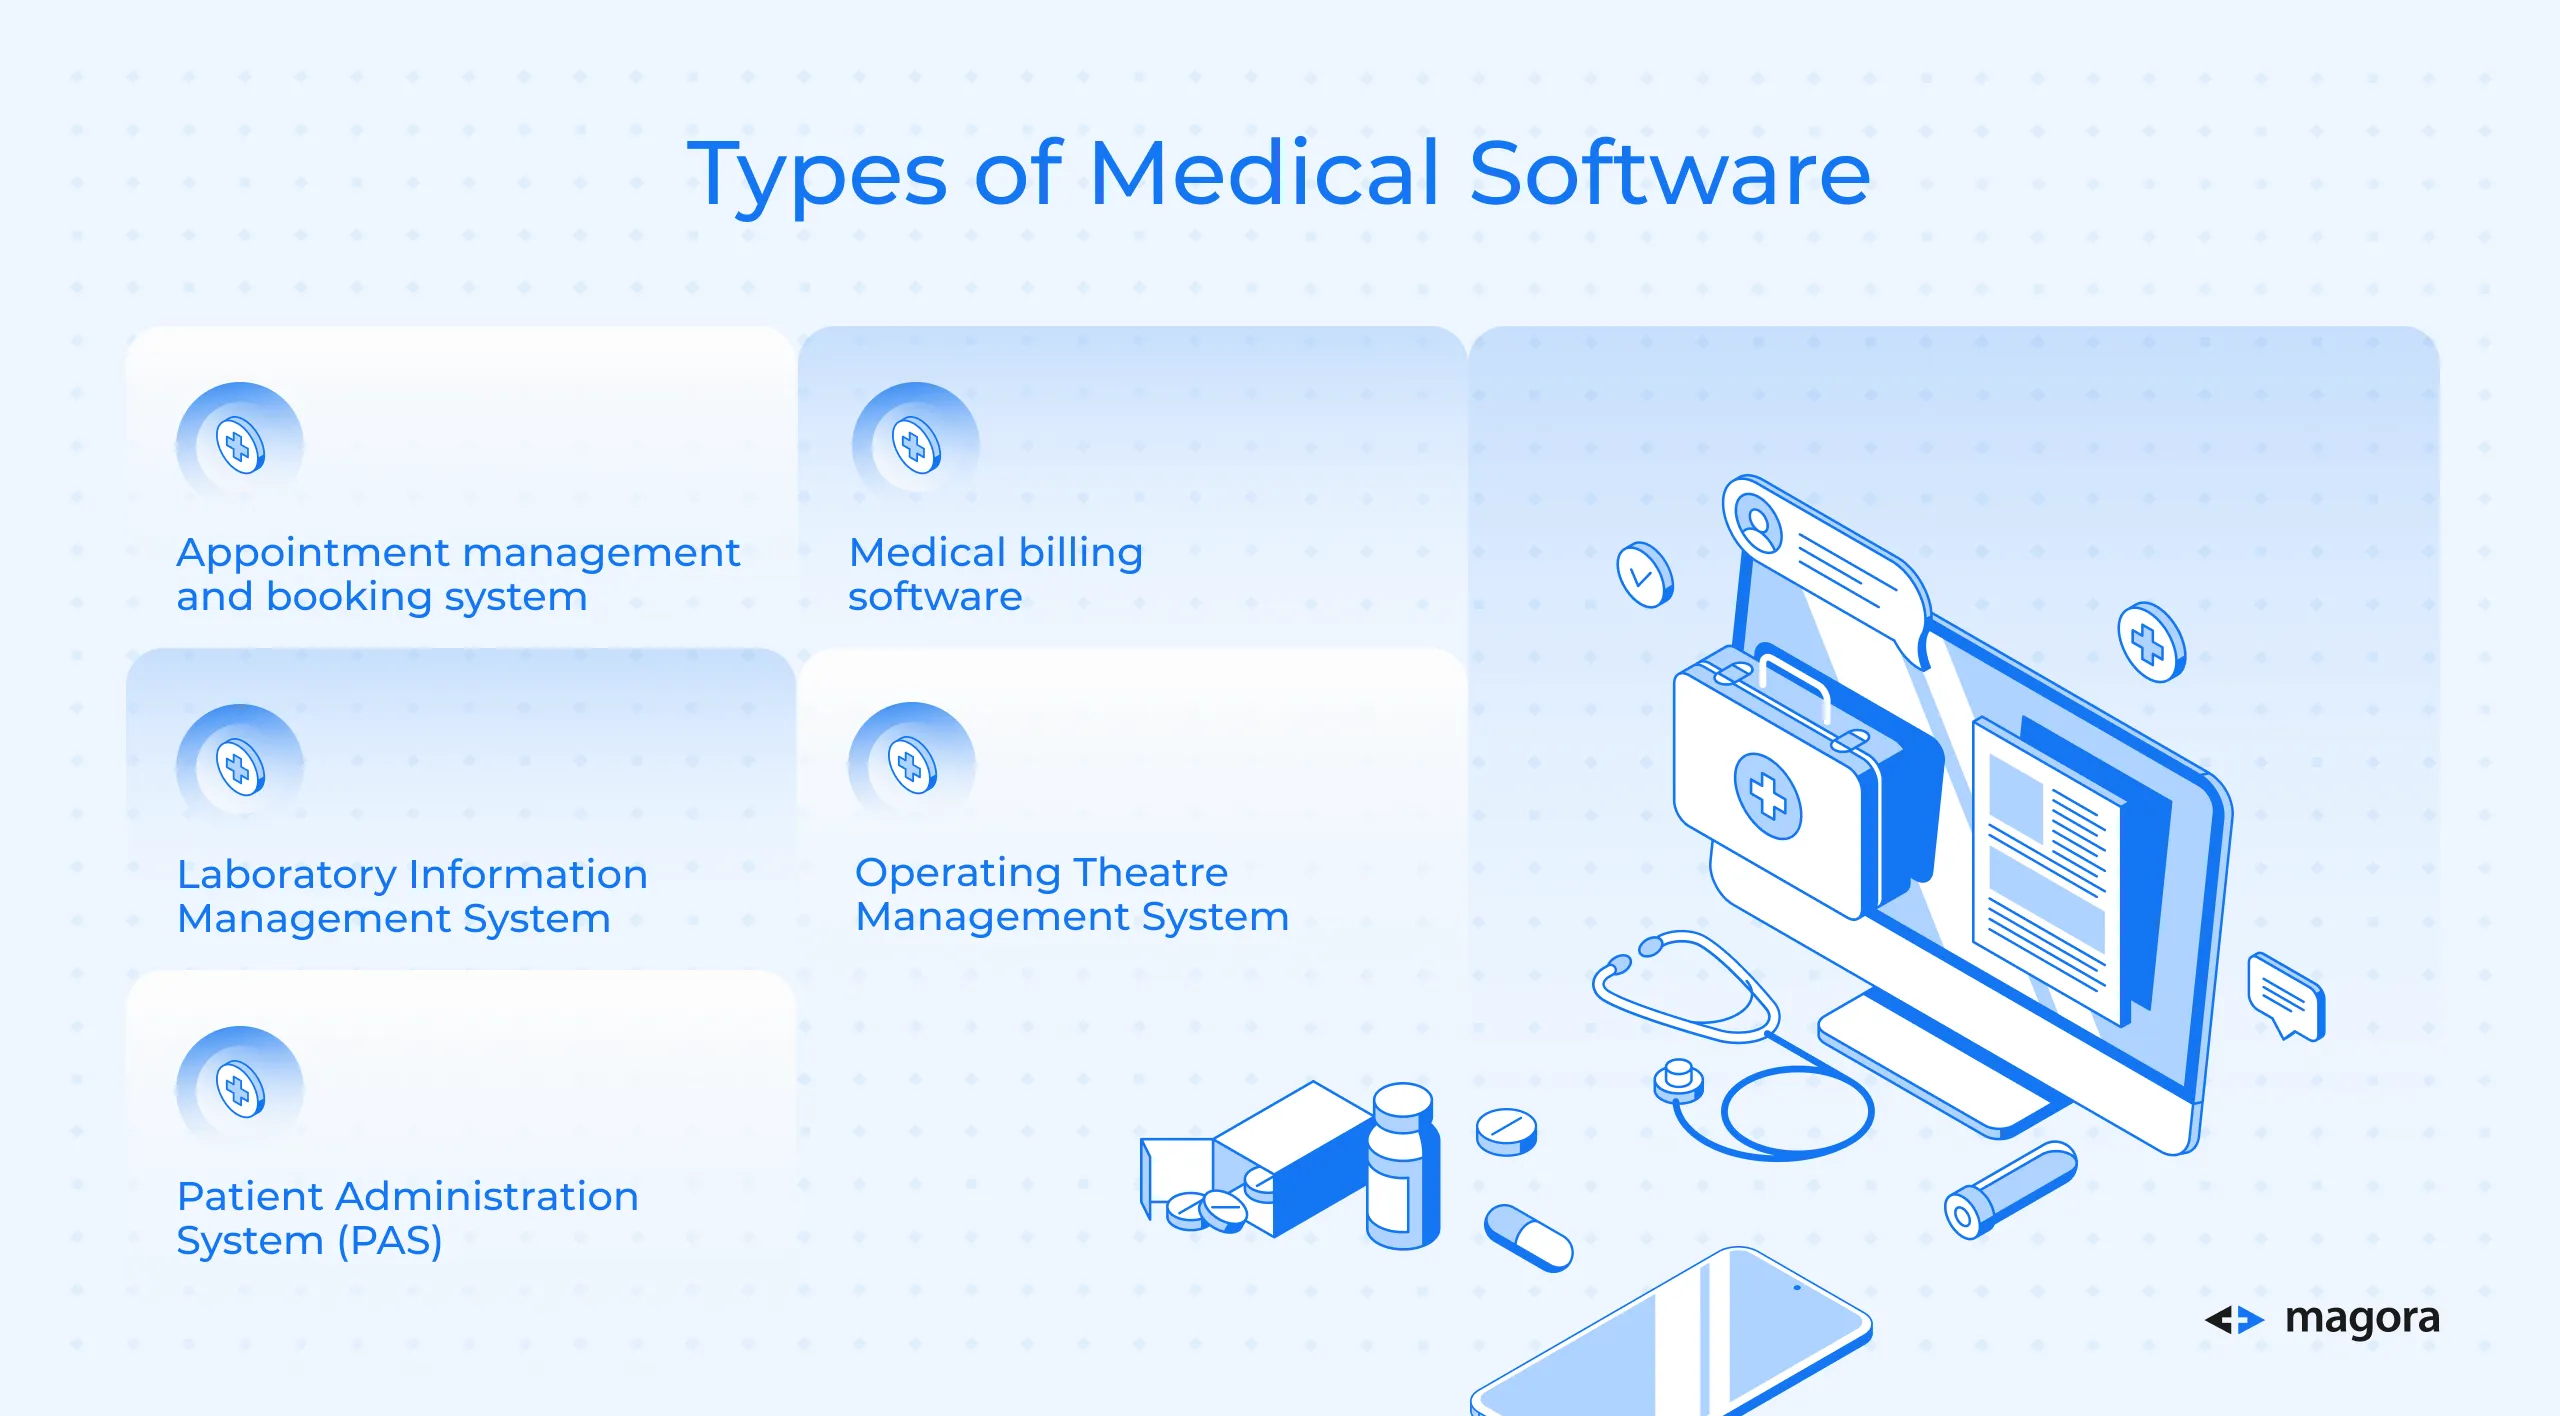 Types of Medical Software